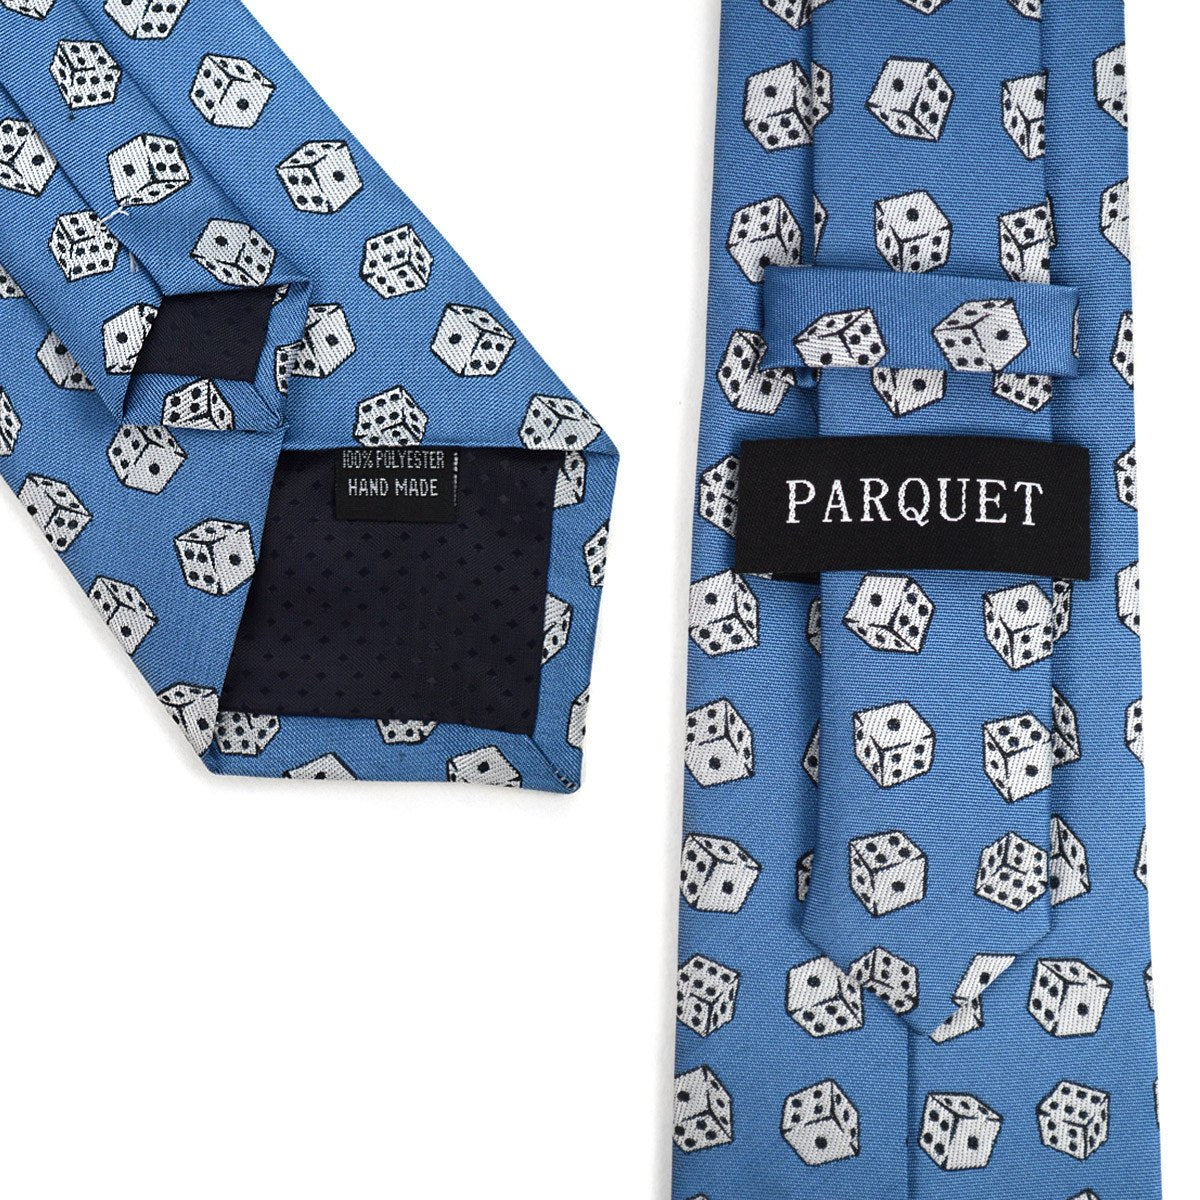 Parquet Men's Novelty Fashion Neckties with Gift Box (Dice Pattern - Blue)